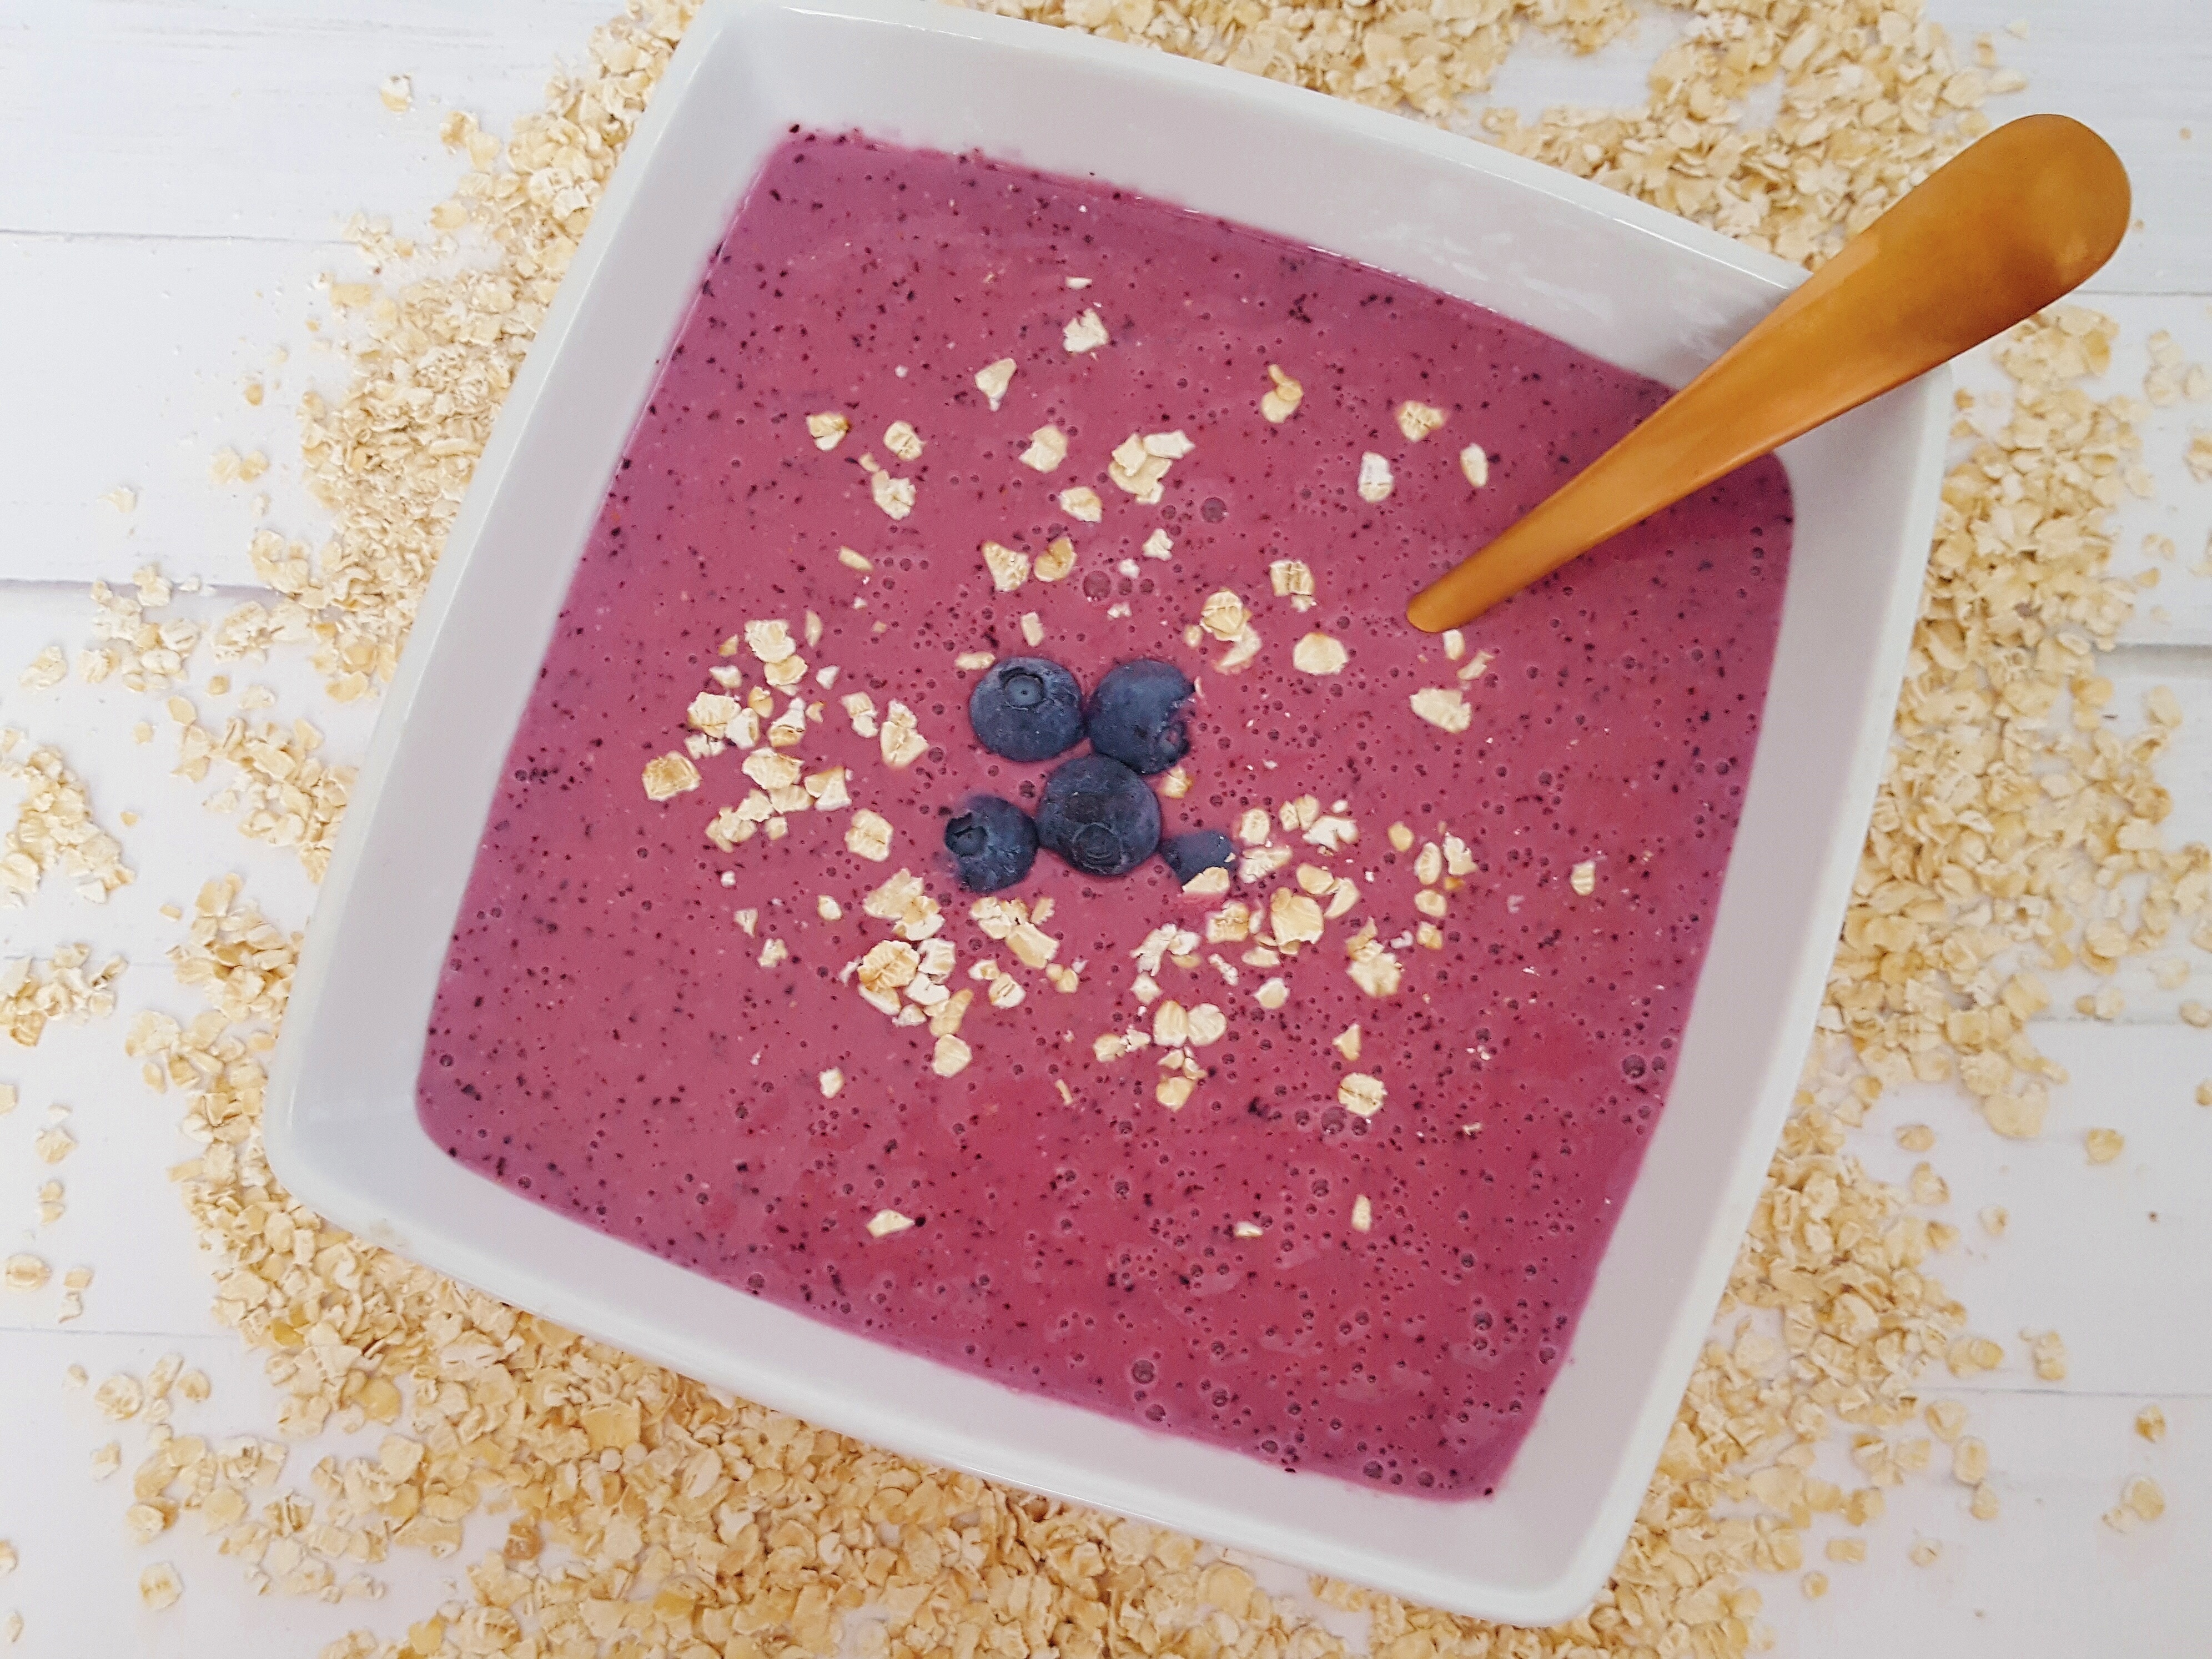 Blueberry Oat Smoothies